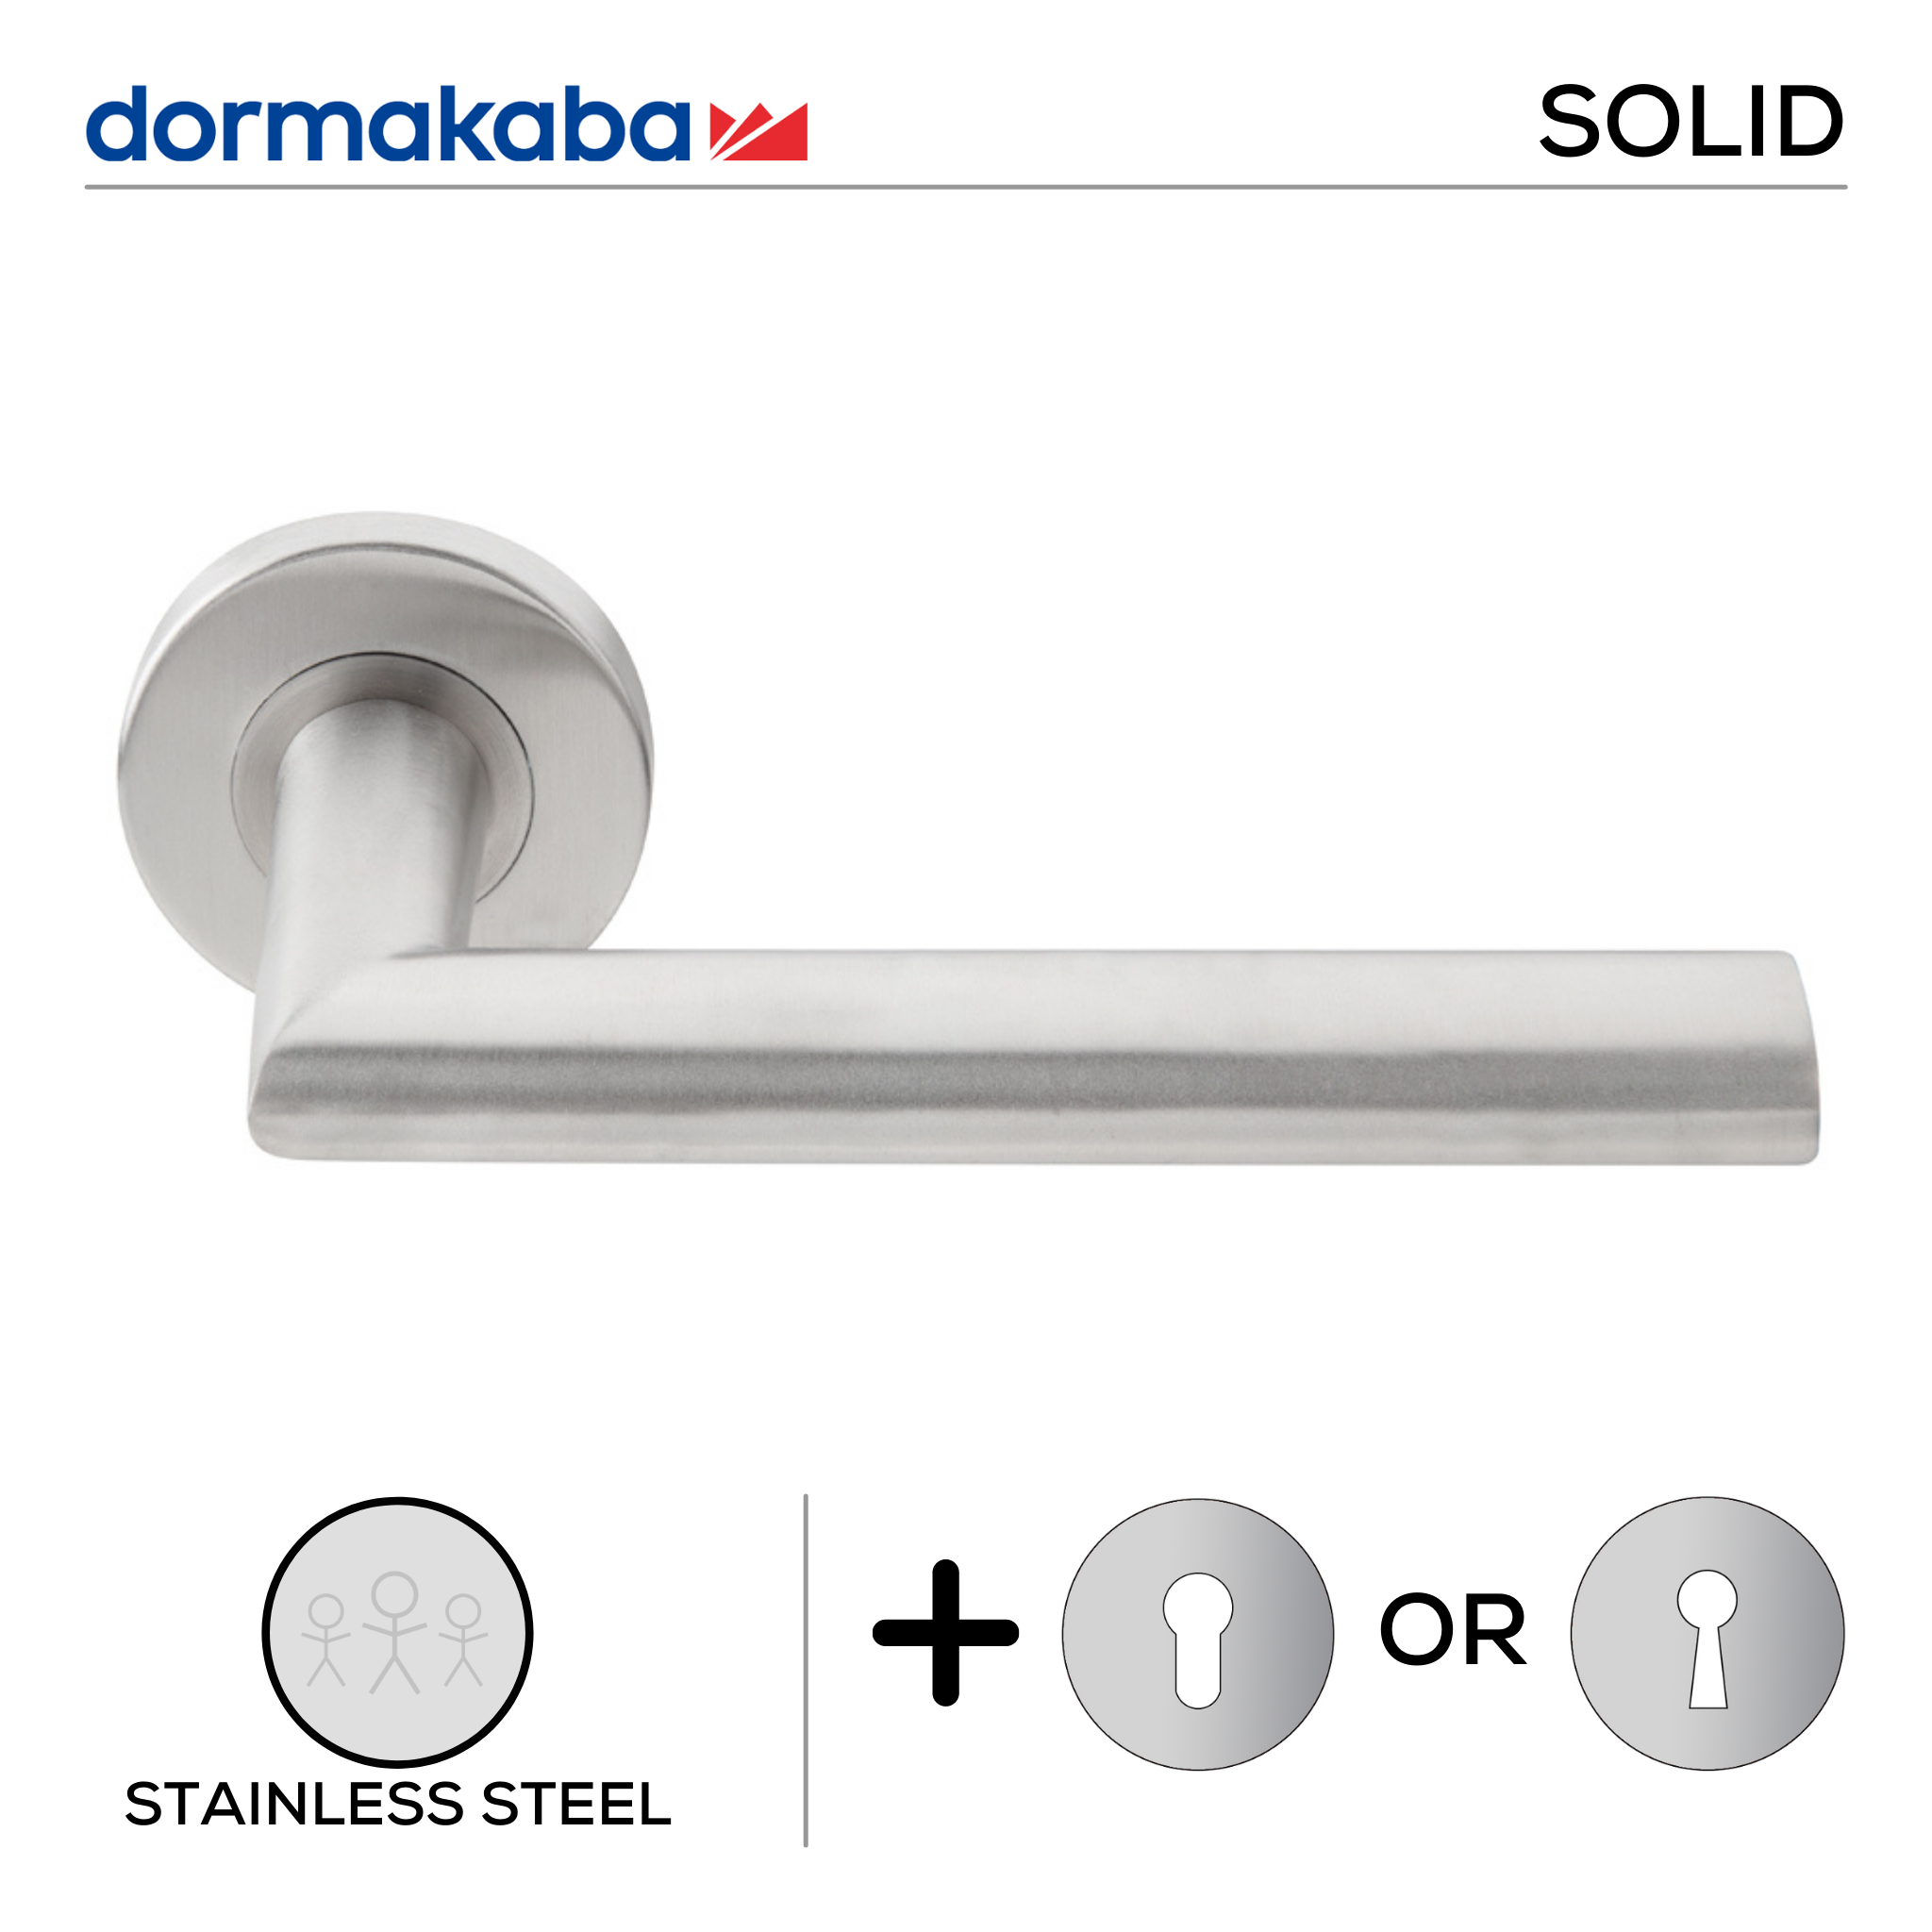 SH 823, Lever Handles, Solid, On Round Rose, With Escutcheons, 151mm (l), Stainless Steel, DORMAKABA